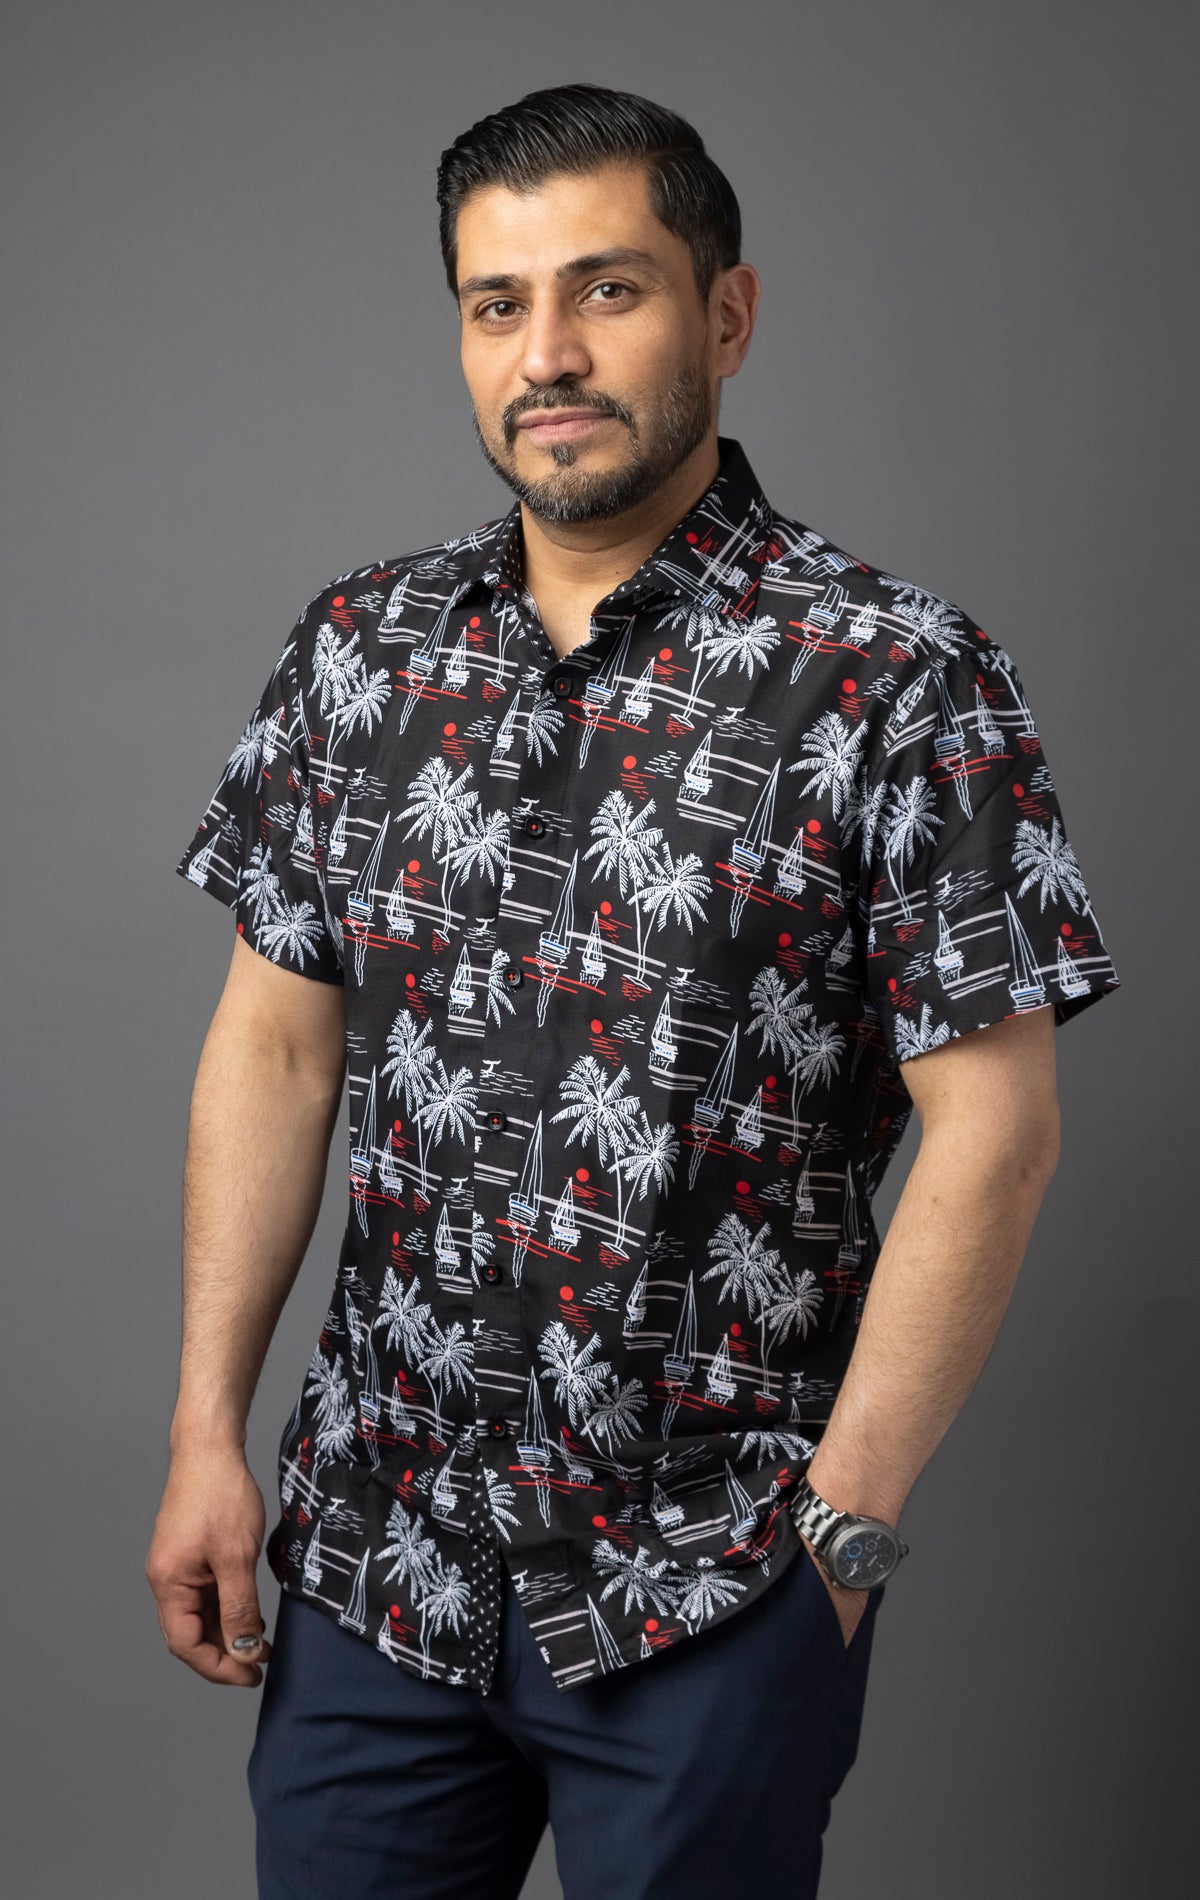 Floral button up short sleeve shirt with tailored waist, modern fit.